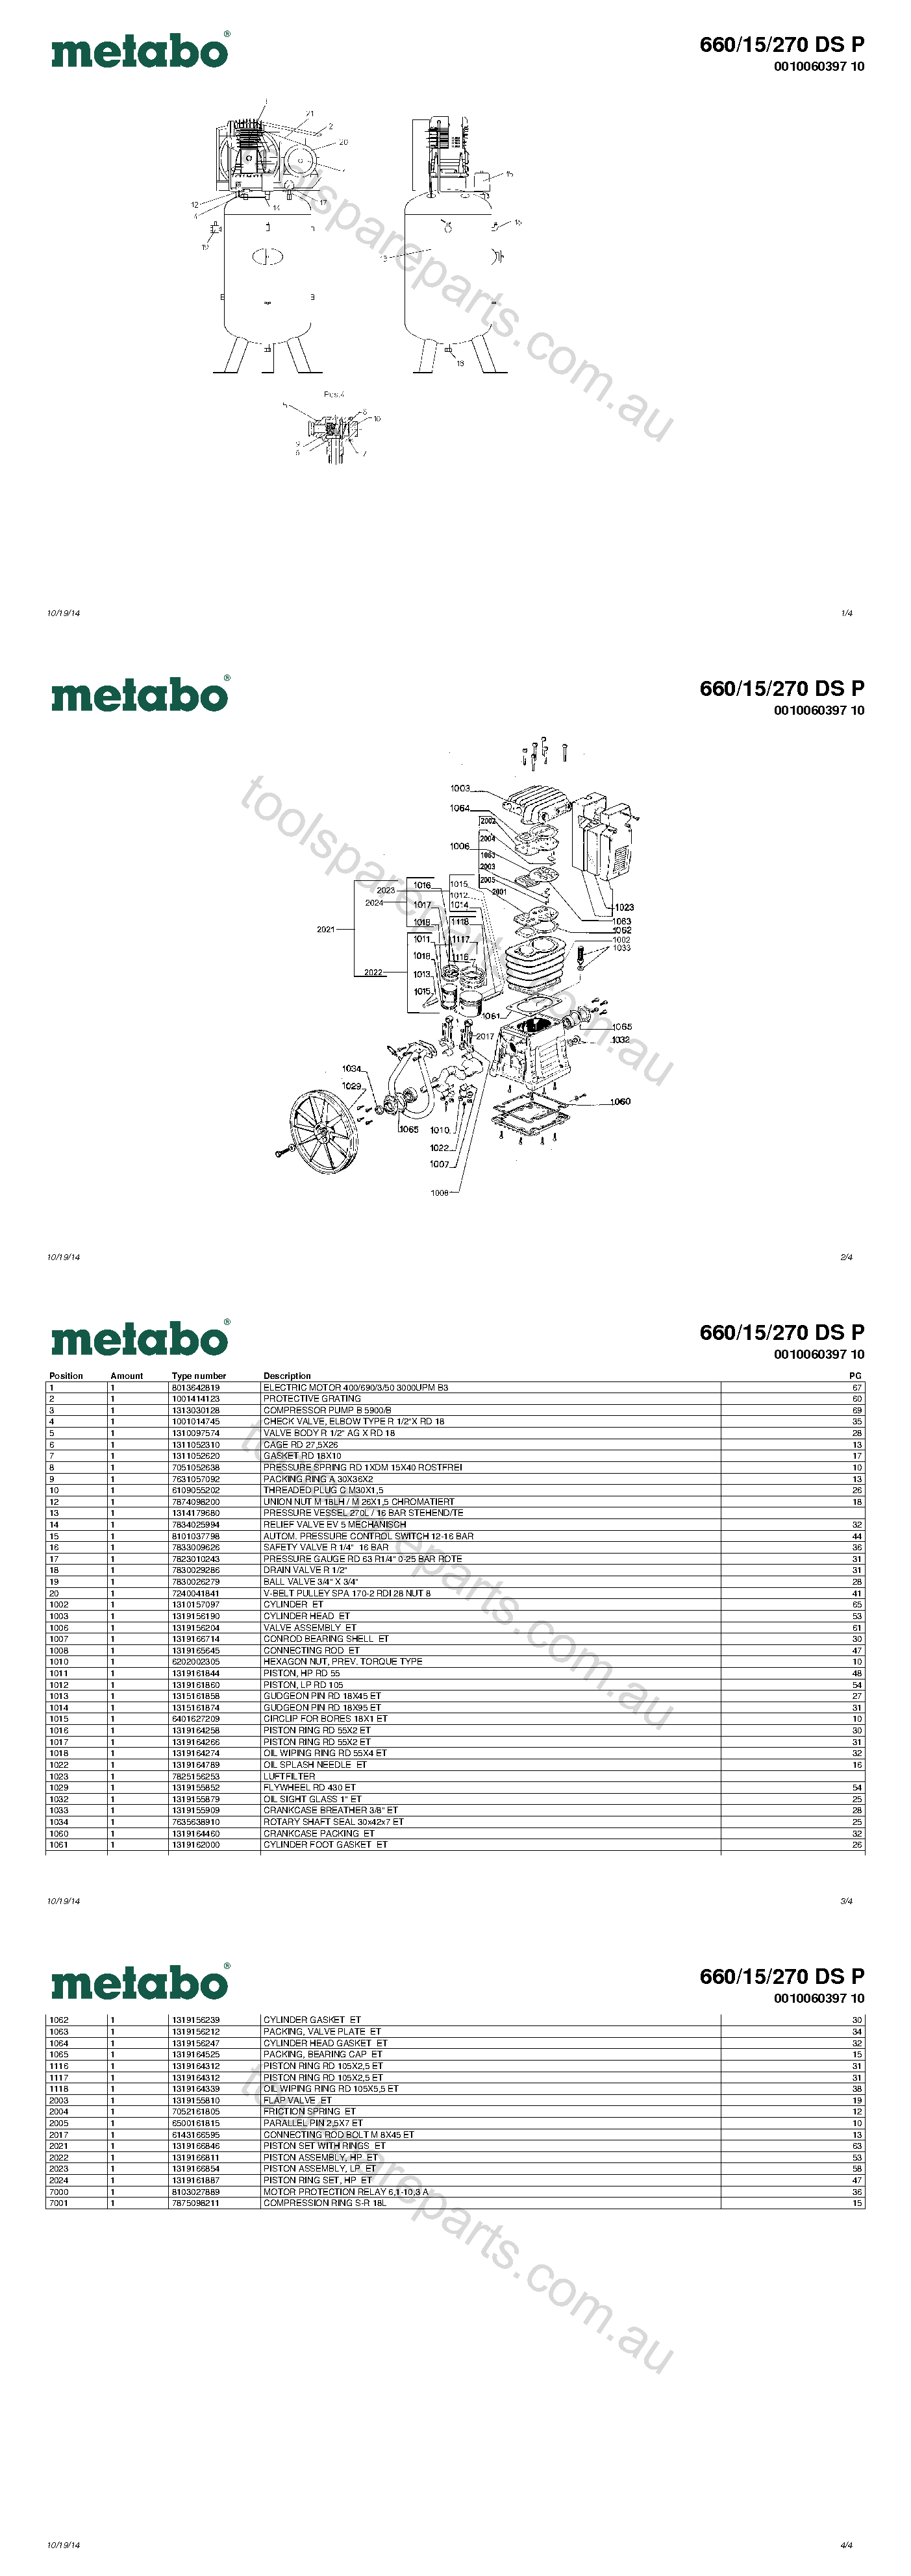 Metabo 660/15/270 DS P 0010060397 10  Diagram 1